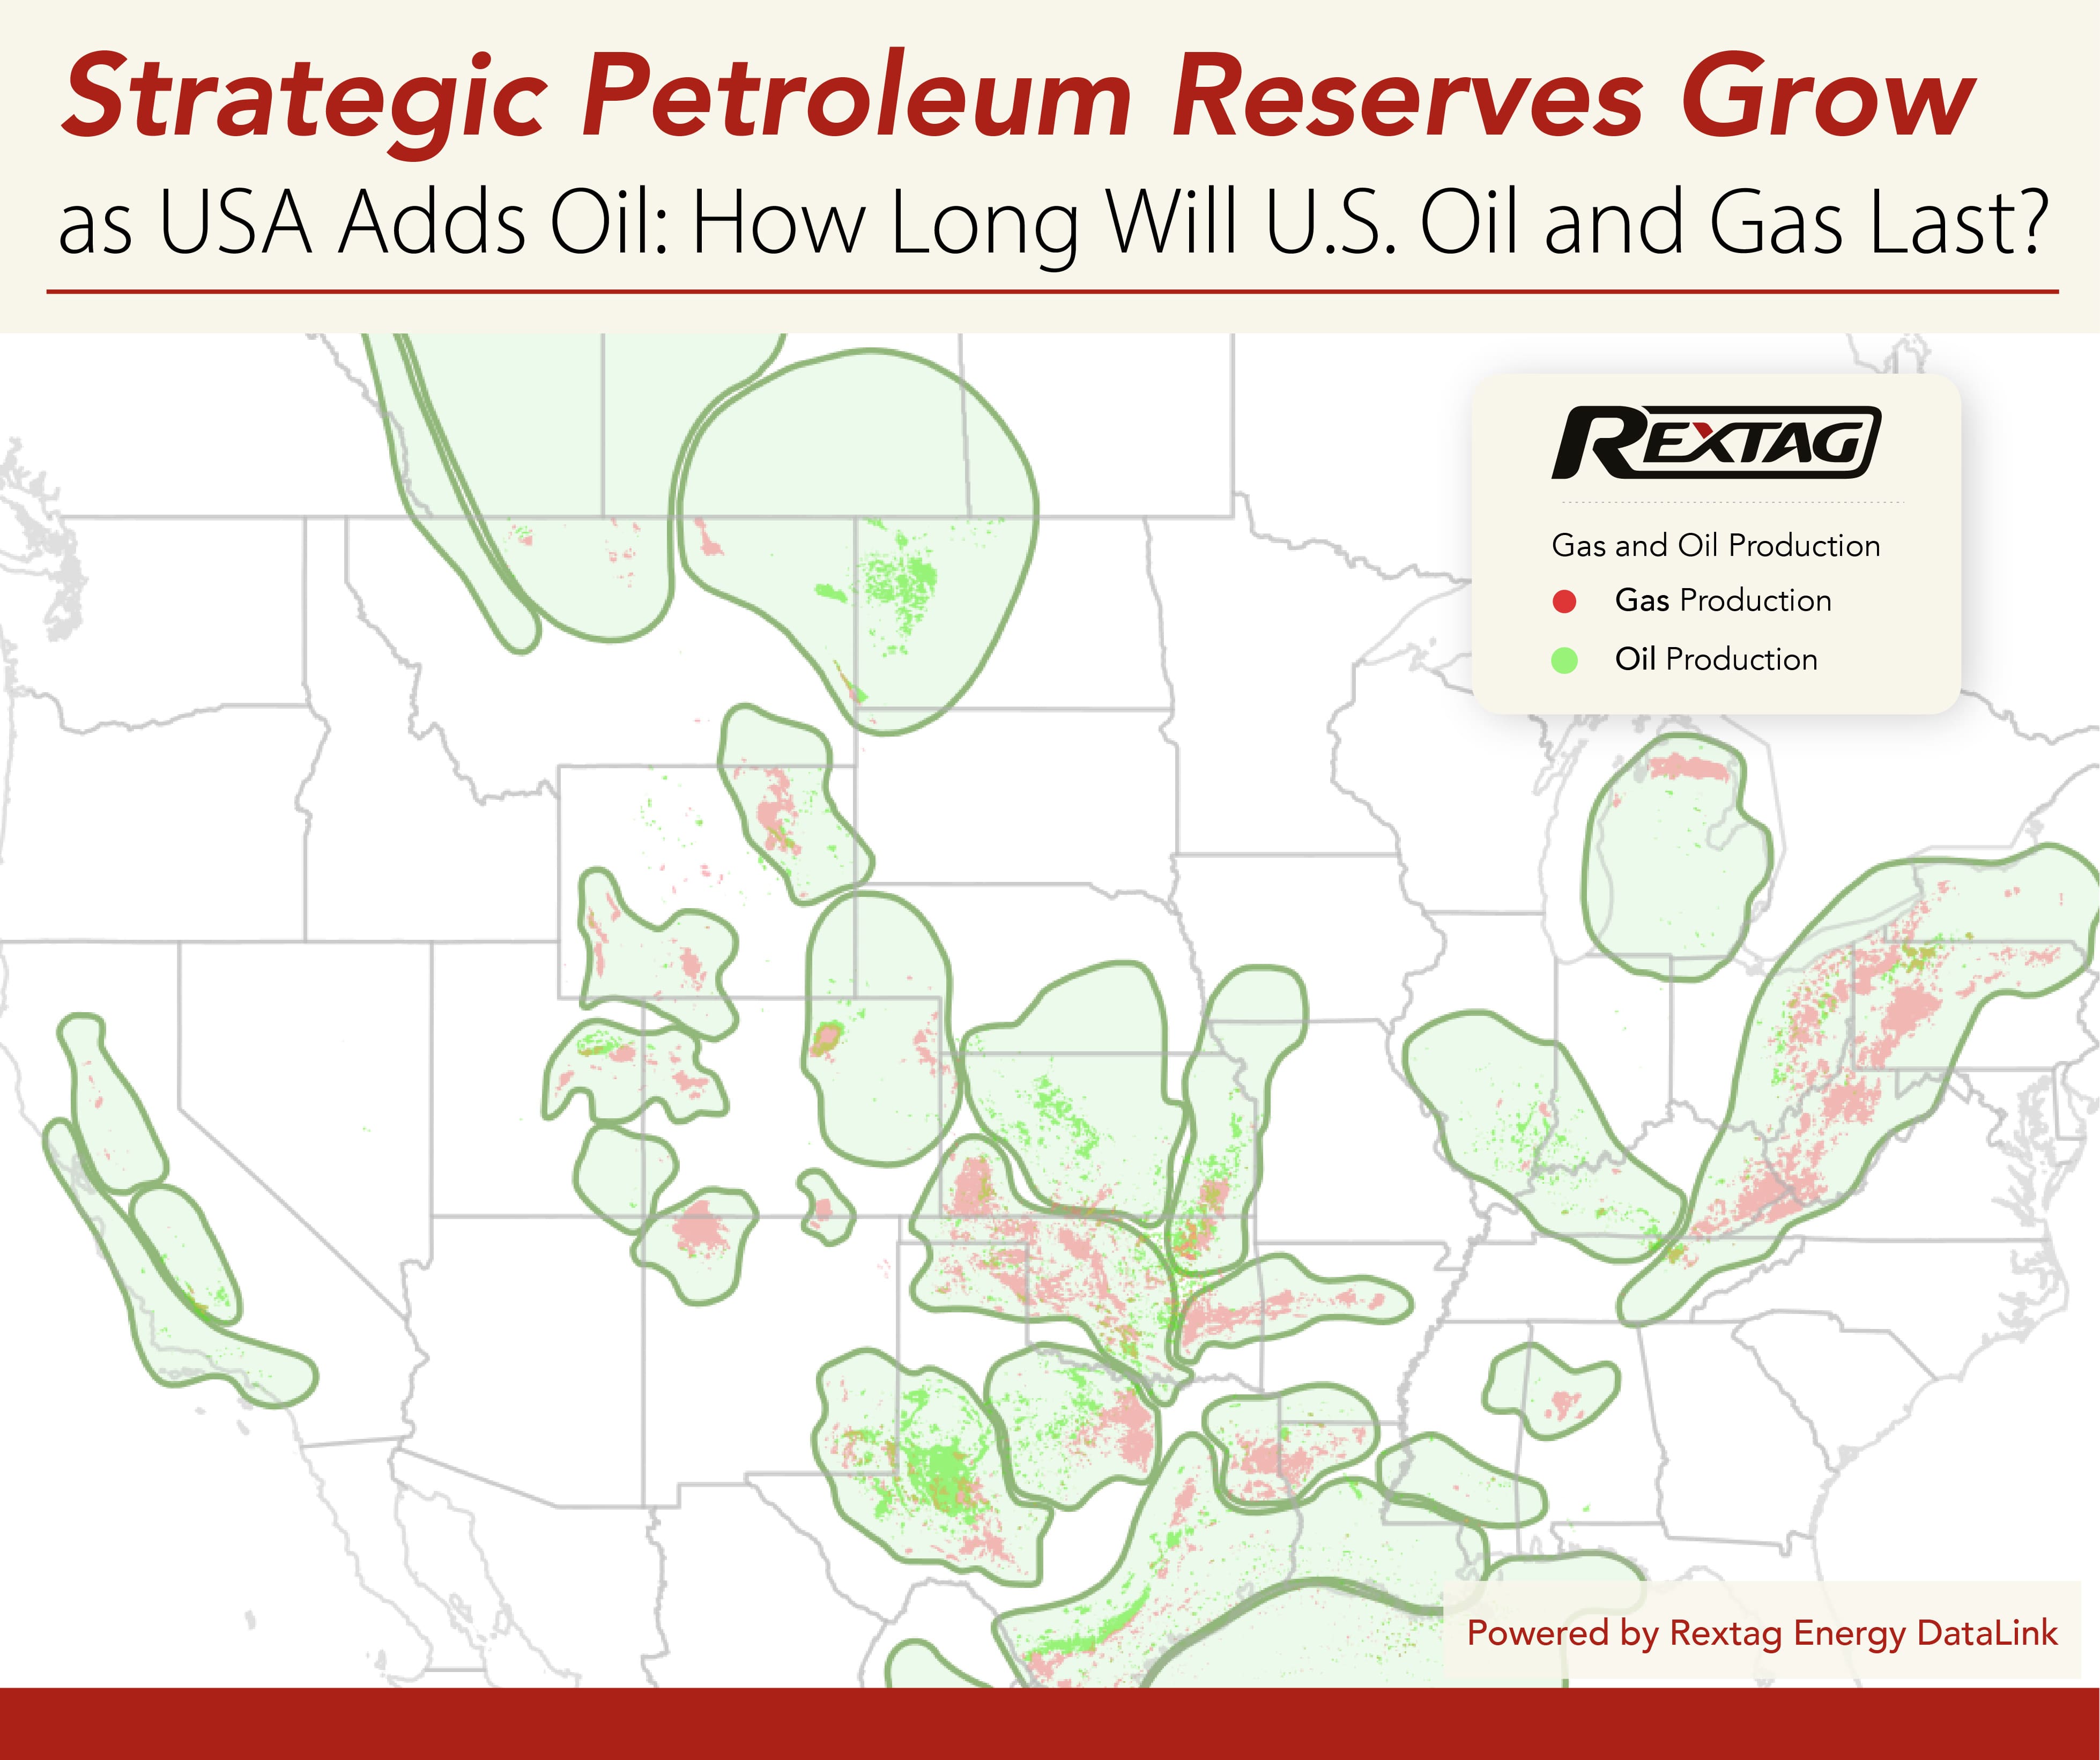 Strategic-Petroleum-Reserves-Grow-as-USA-Adds-Oil-How-Long-Will-U-S-Oil-and-Gas-Last